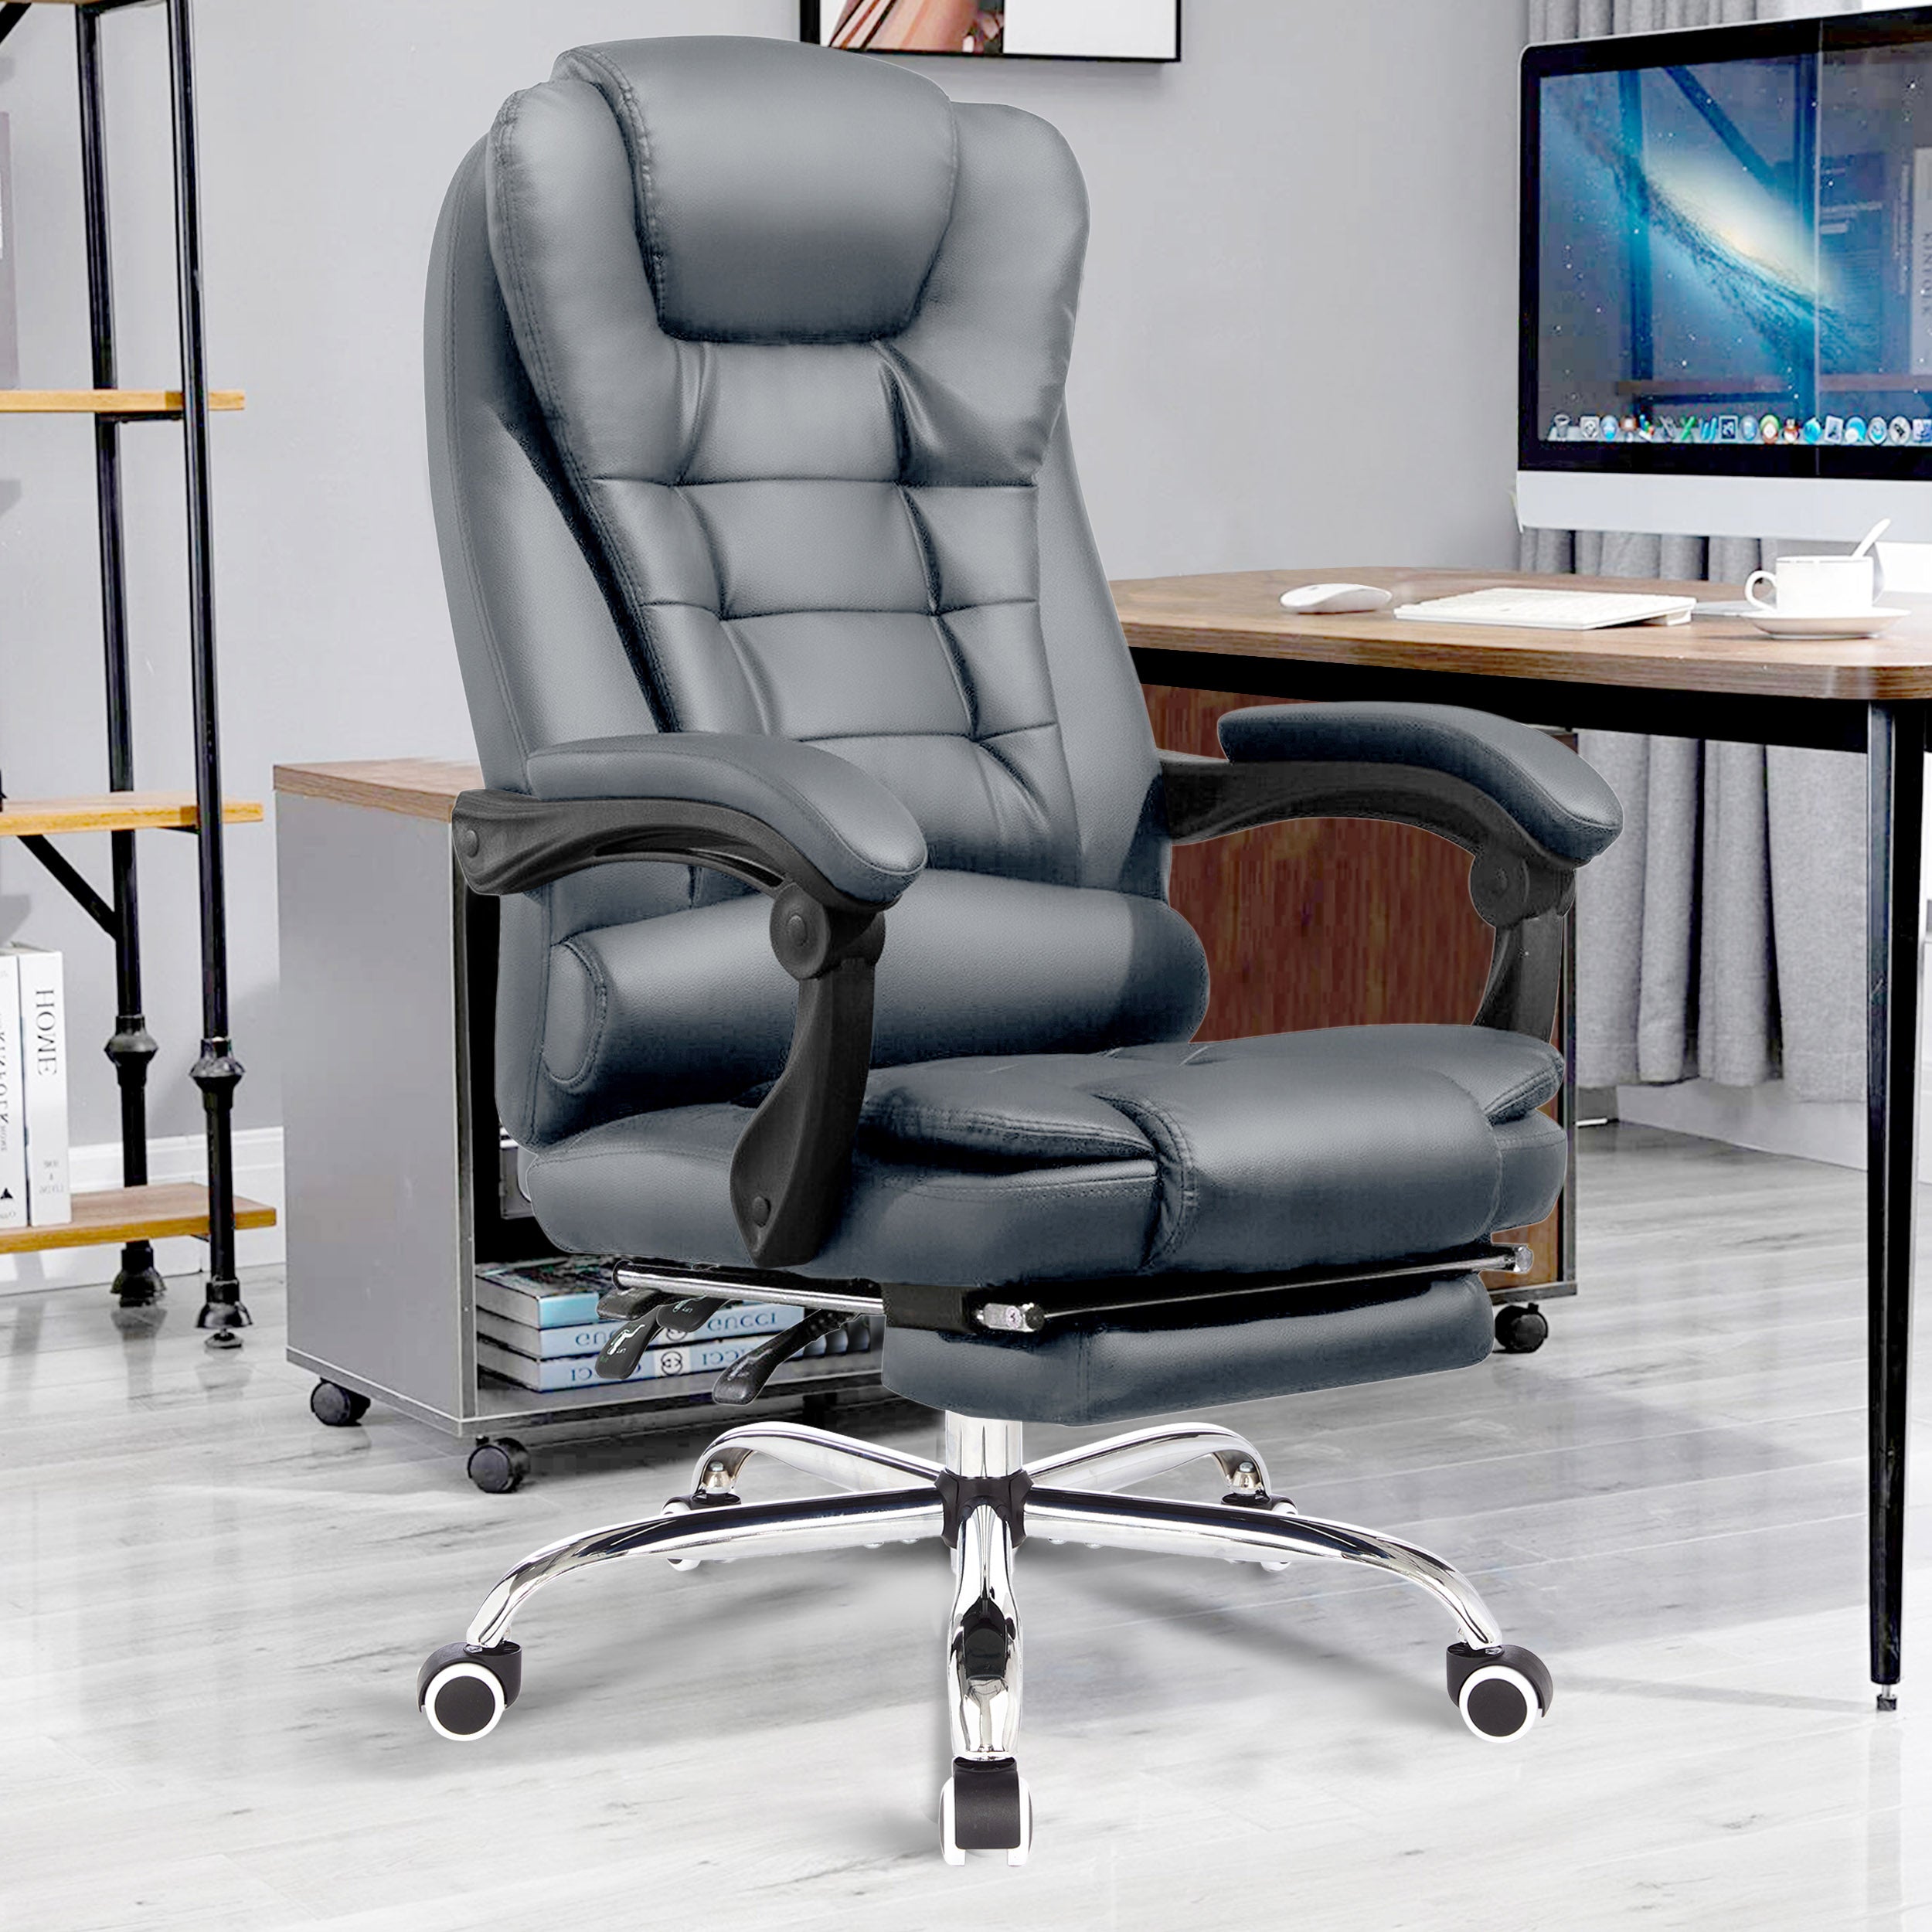 Blisswood Office Recliner Chair: Ultimate Comfort